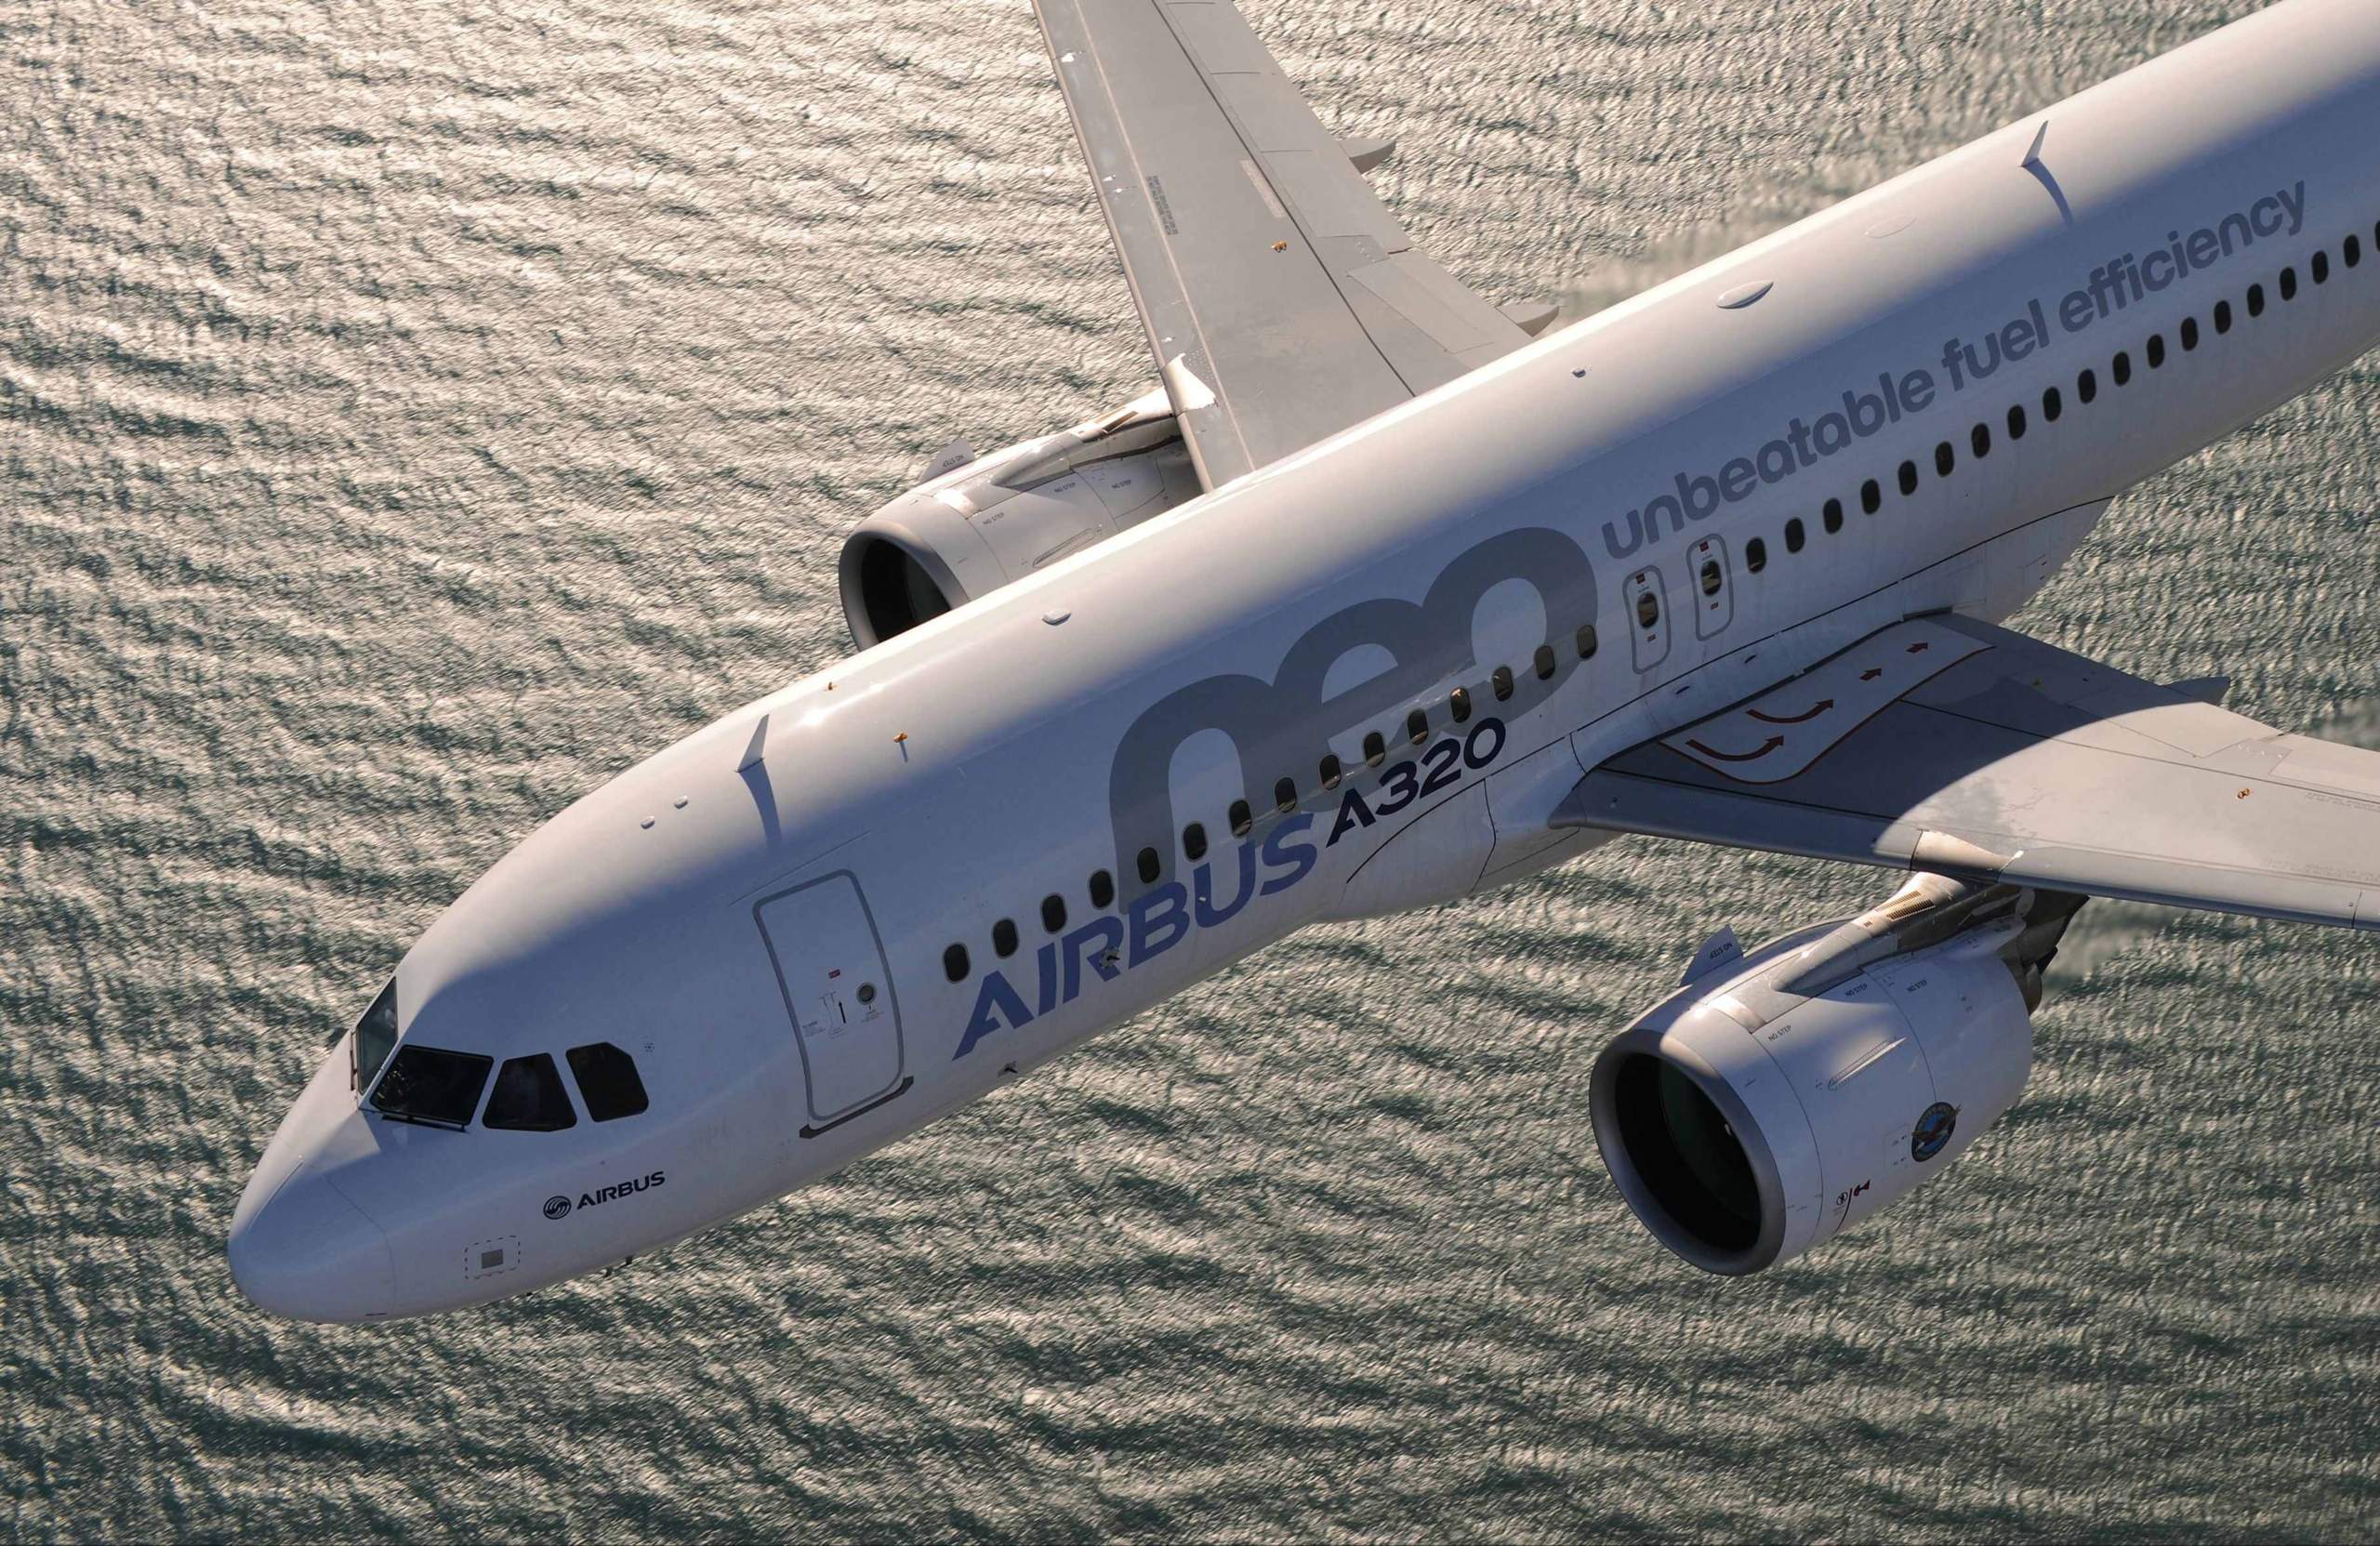 A320 could lead the recovery of Mexican aviation: Airbus